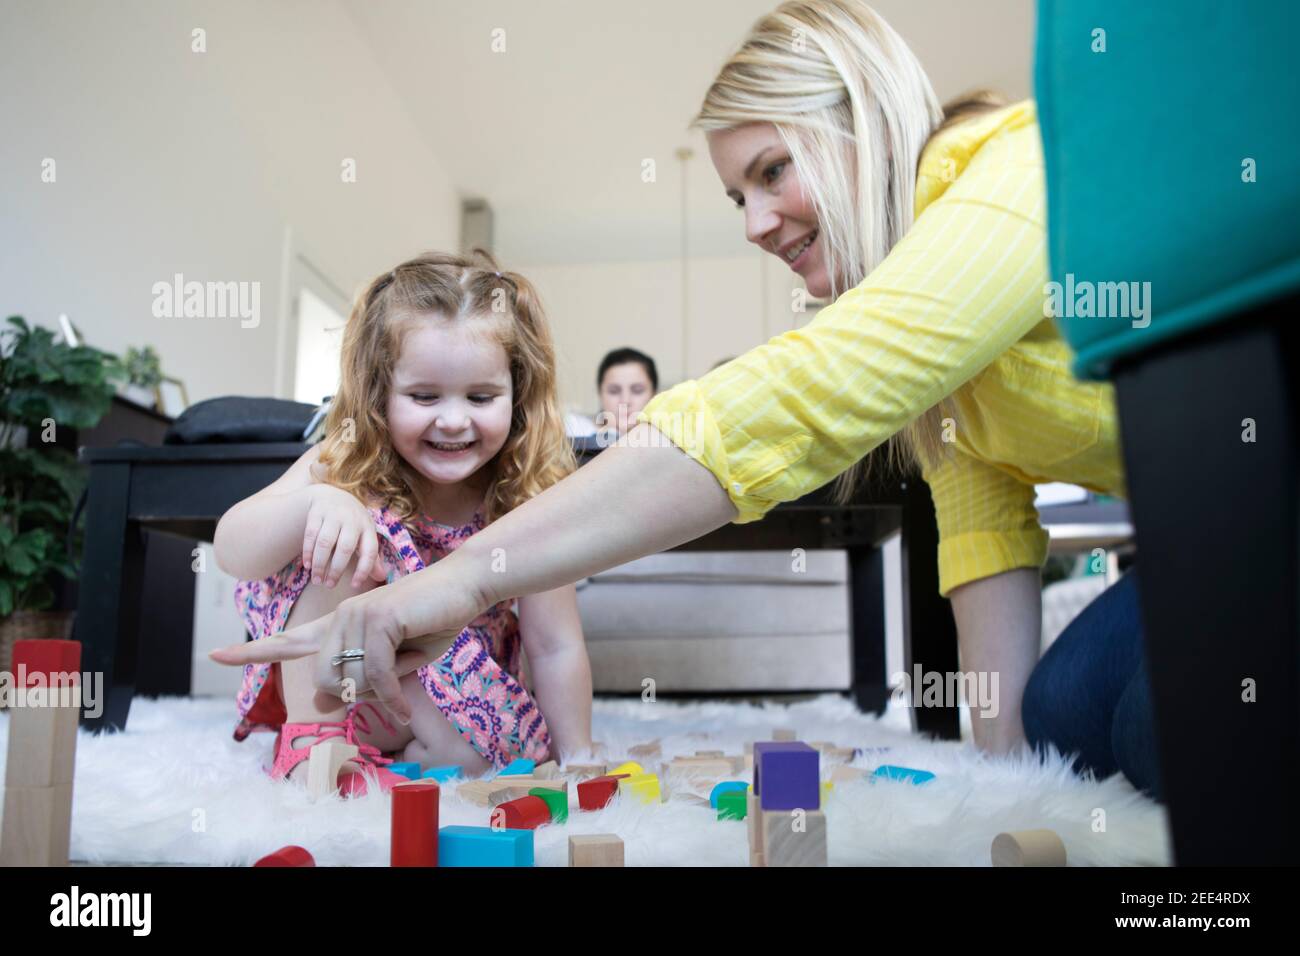 A mom or caregiver plays with a little girl on the floor of a modern home. Stock Photo